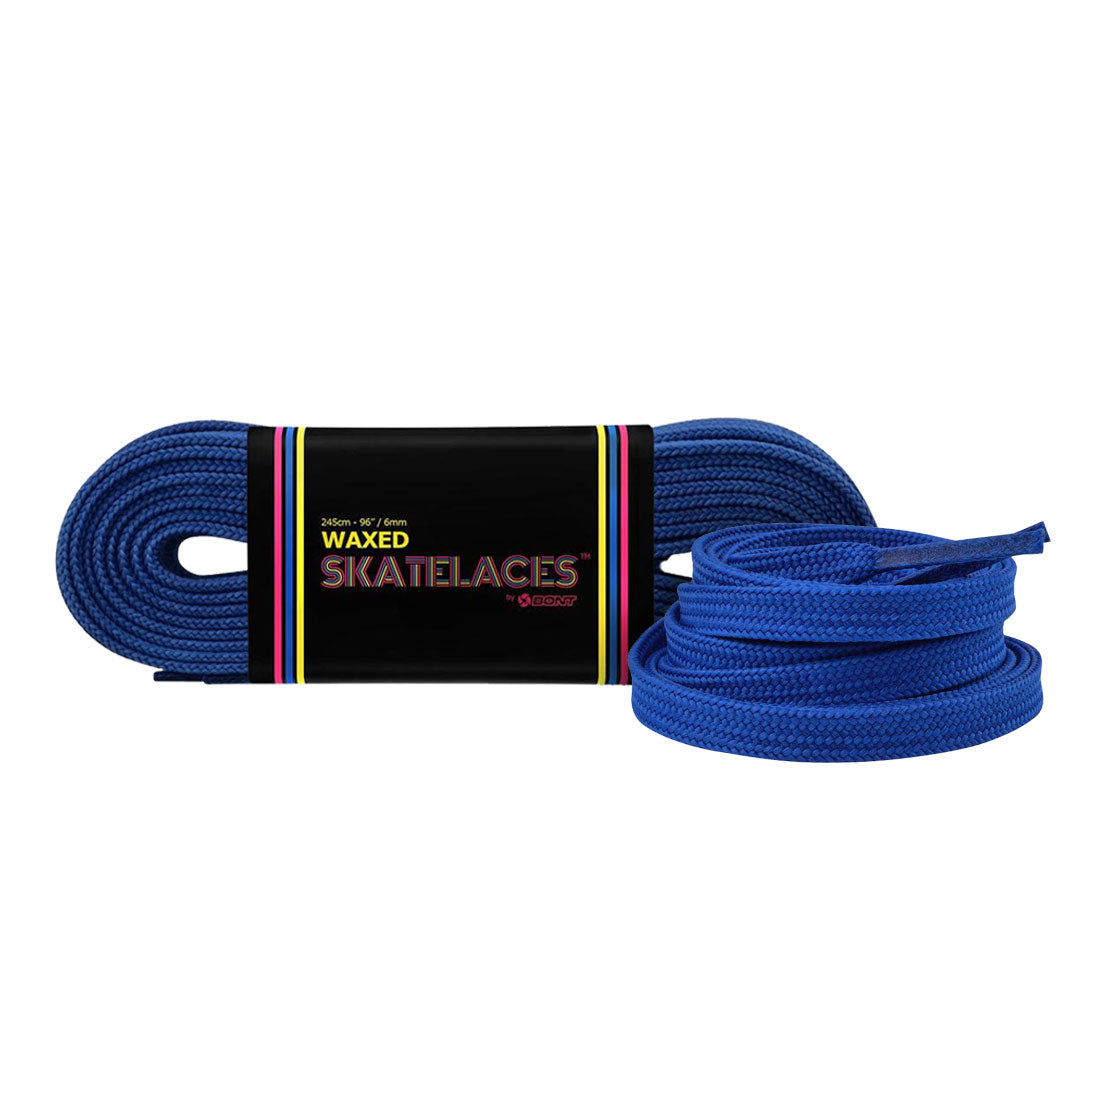 Bont Waxed 8mm Laces - 150cm/59in Mad About You Blue Laces